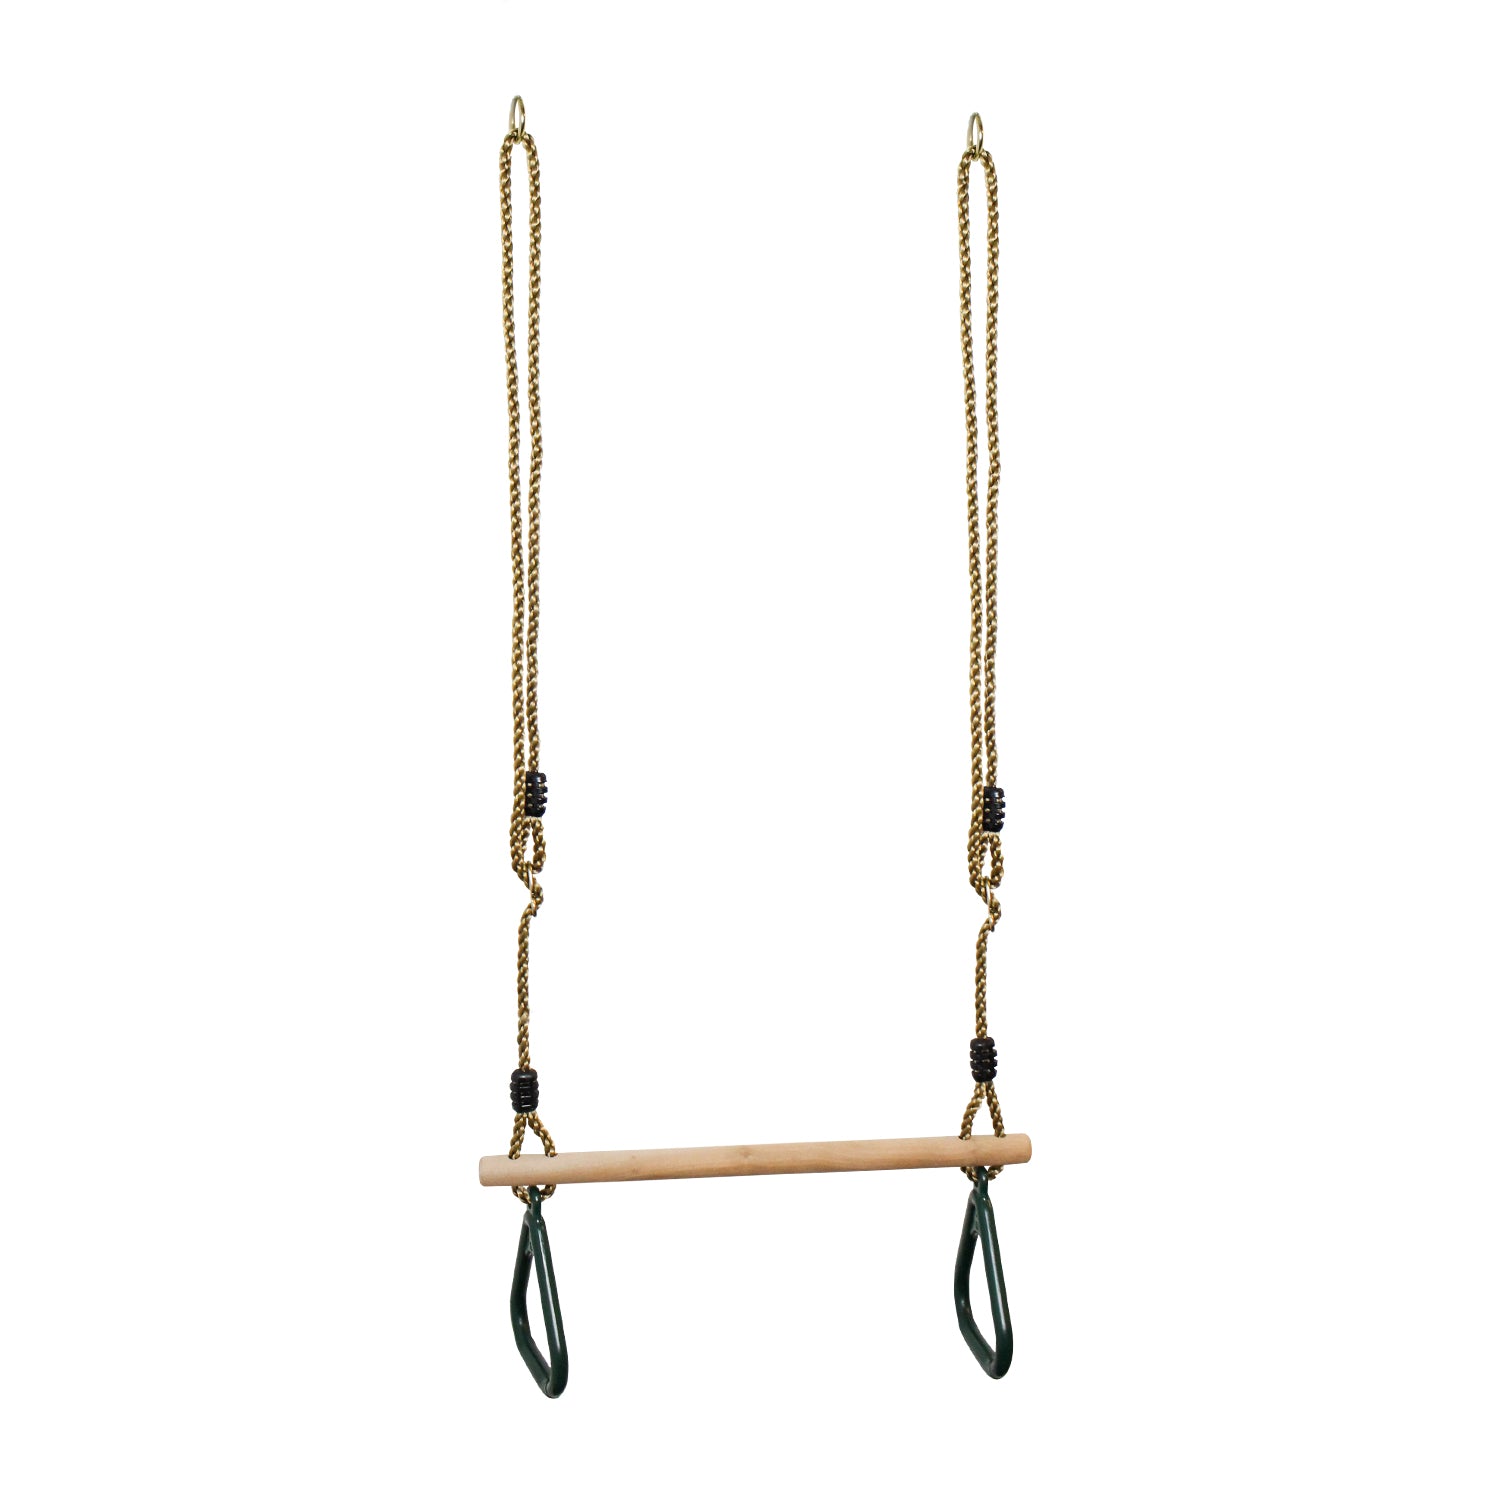 Leogreen-wooden-trapeze-swing-swing-with-gymnastic-rings-green-200-cm-material-plastic-PP-PE-wood